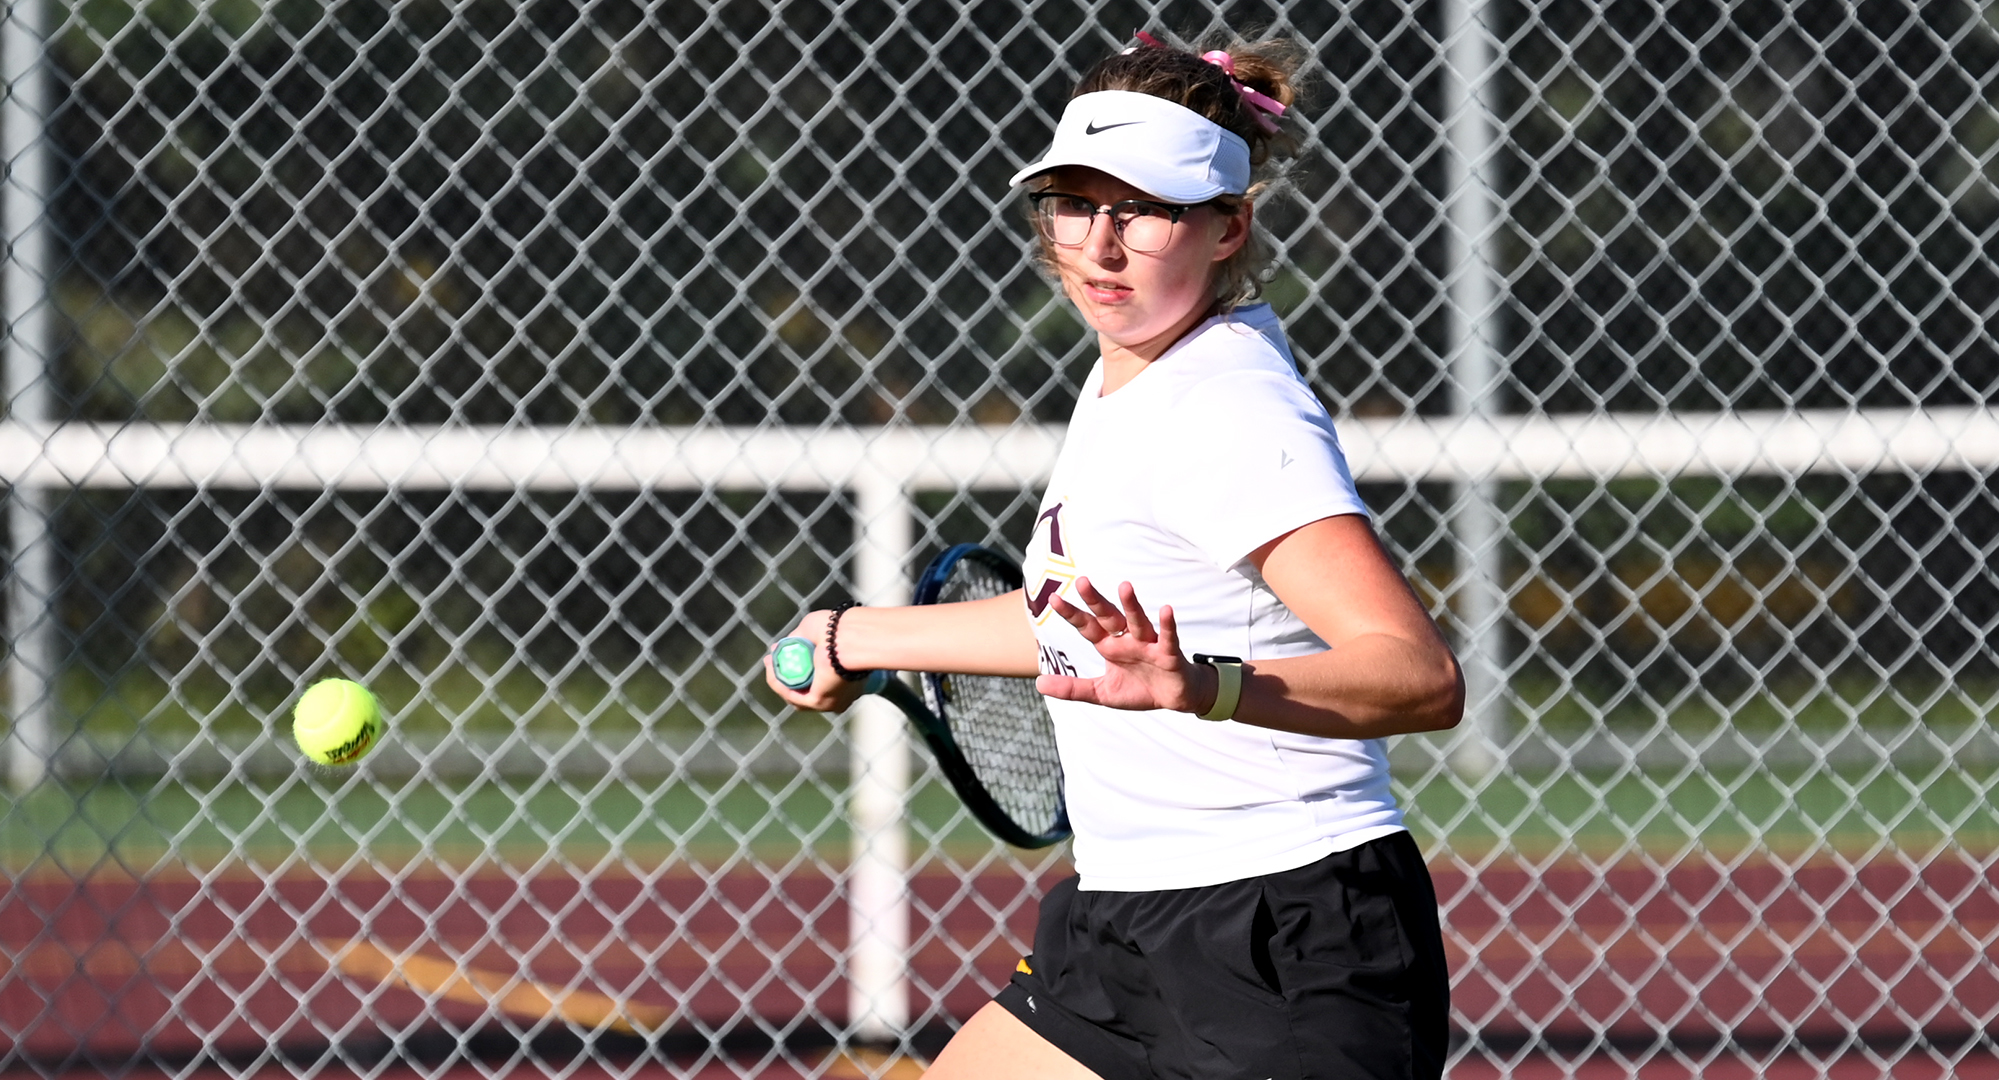 Senior Anna Hacker didn't lose a game in either of her doubles or singles matches as she helped the Cobbers post a 9-0 win at Crown.